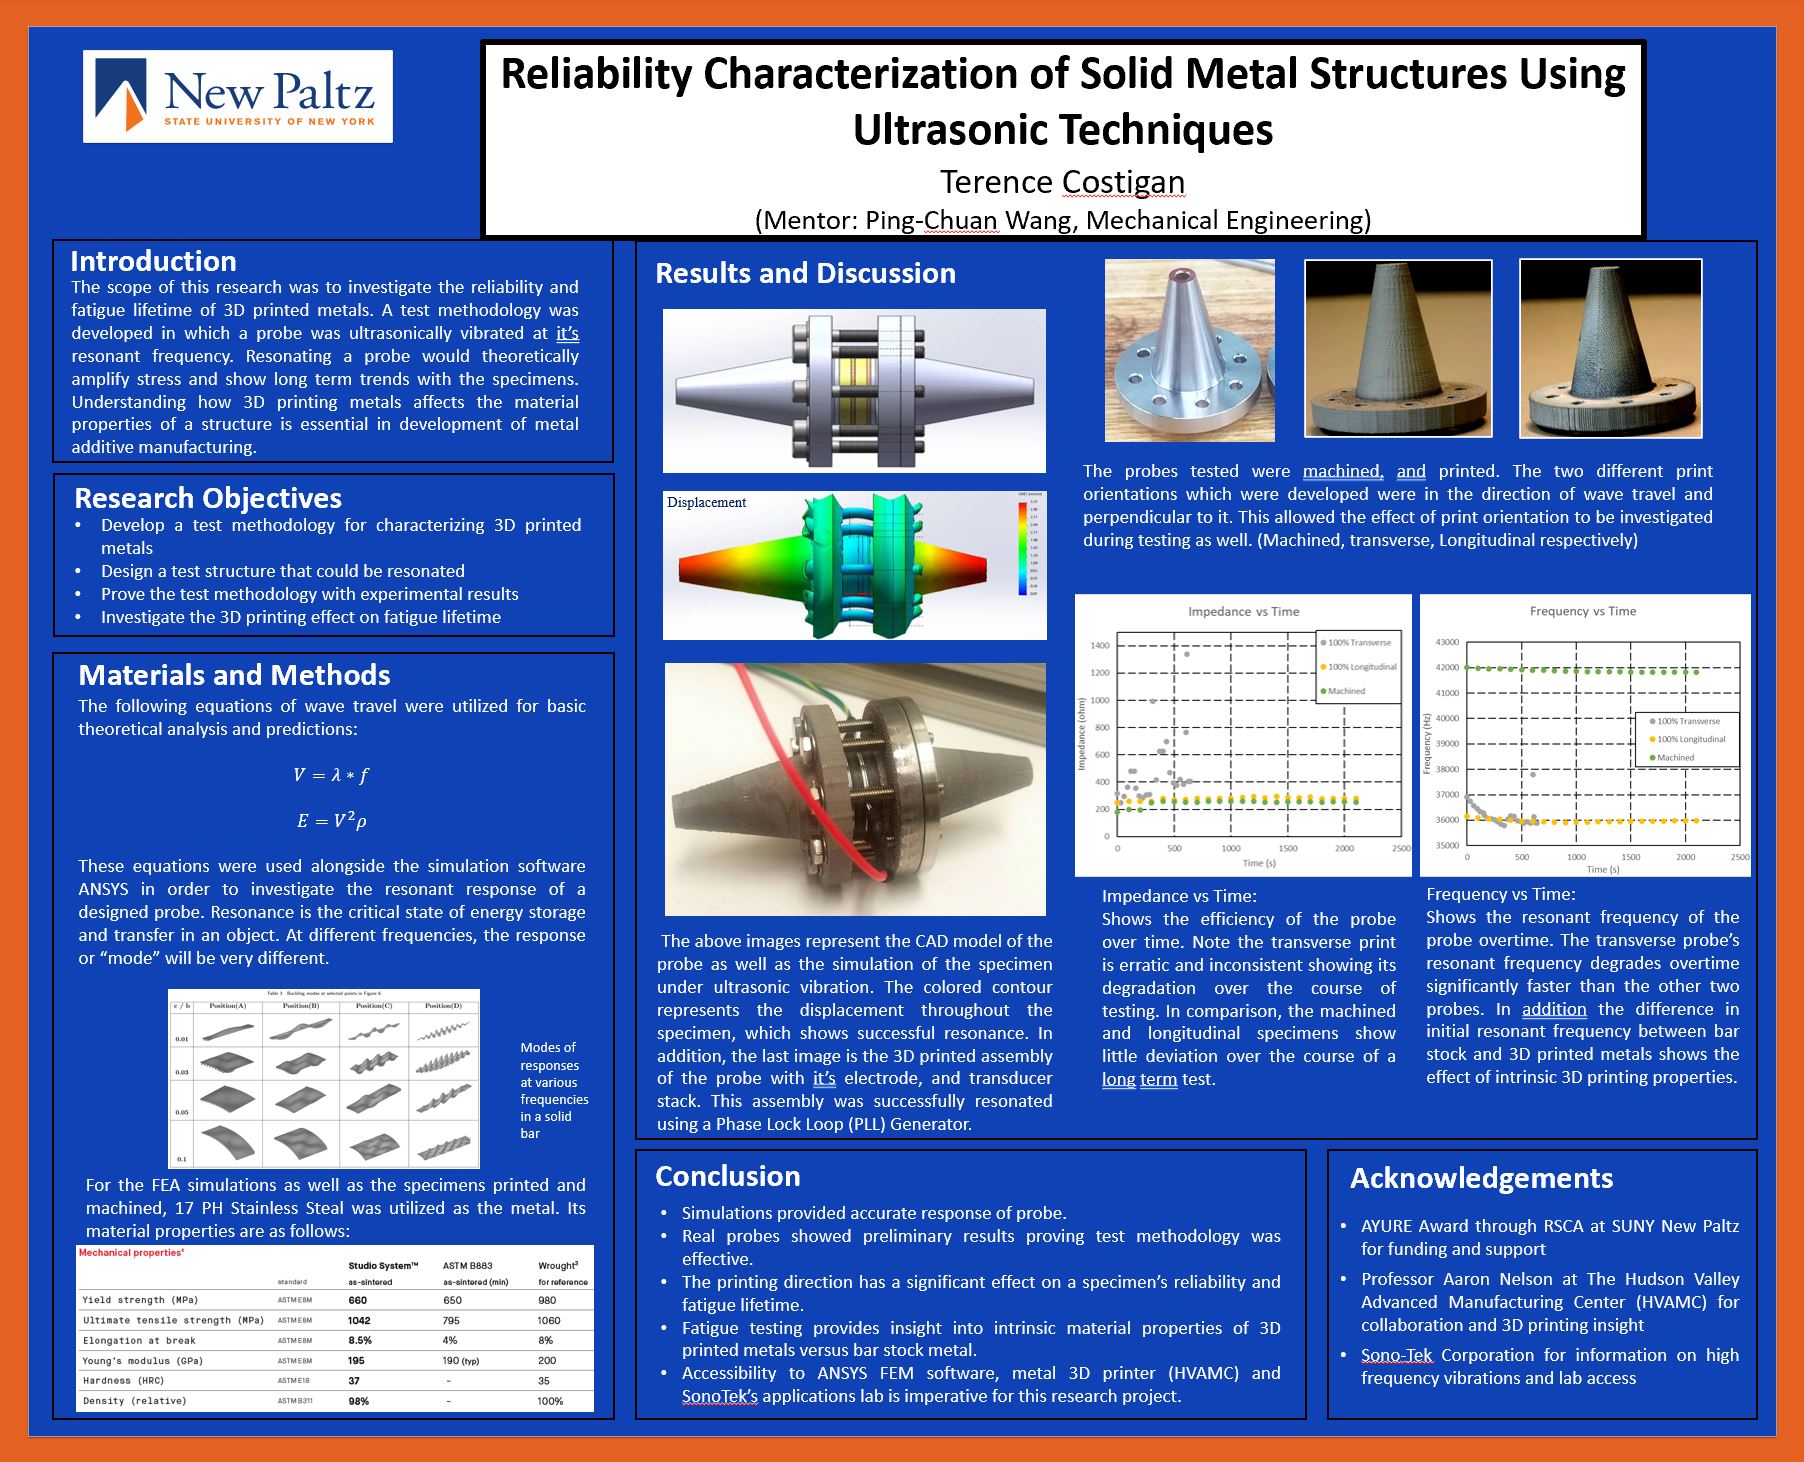 Showcase Image for Reliability Characterization of Solid Metal Structures Using Ultrasonic Techniques